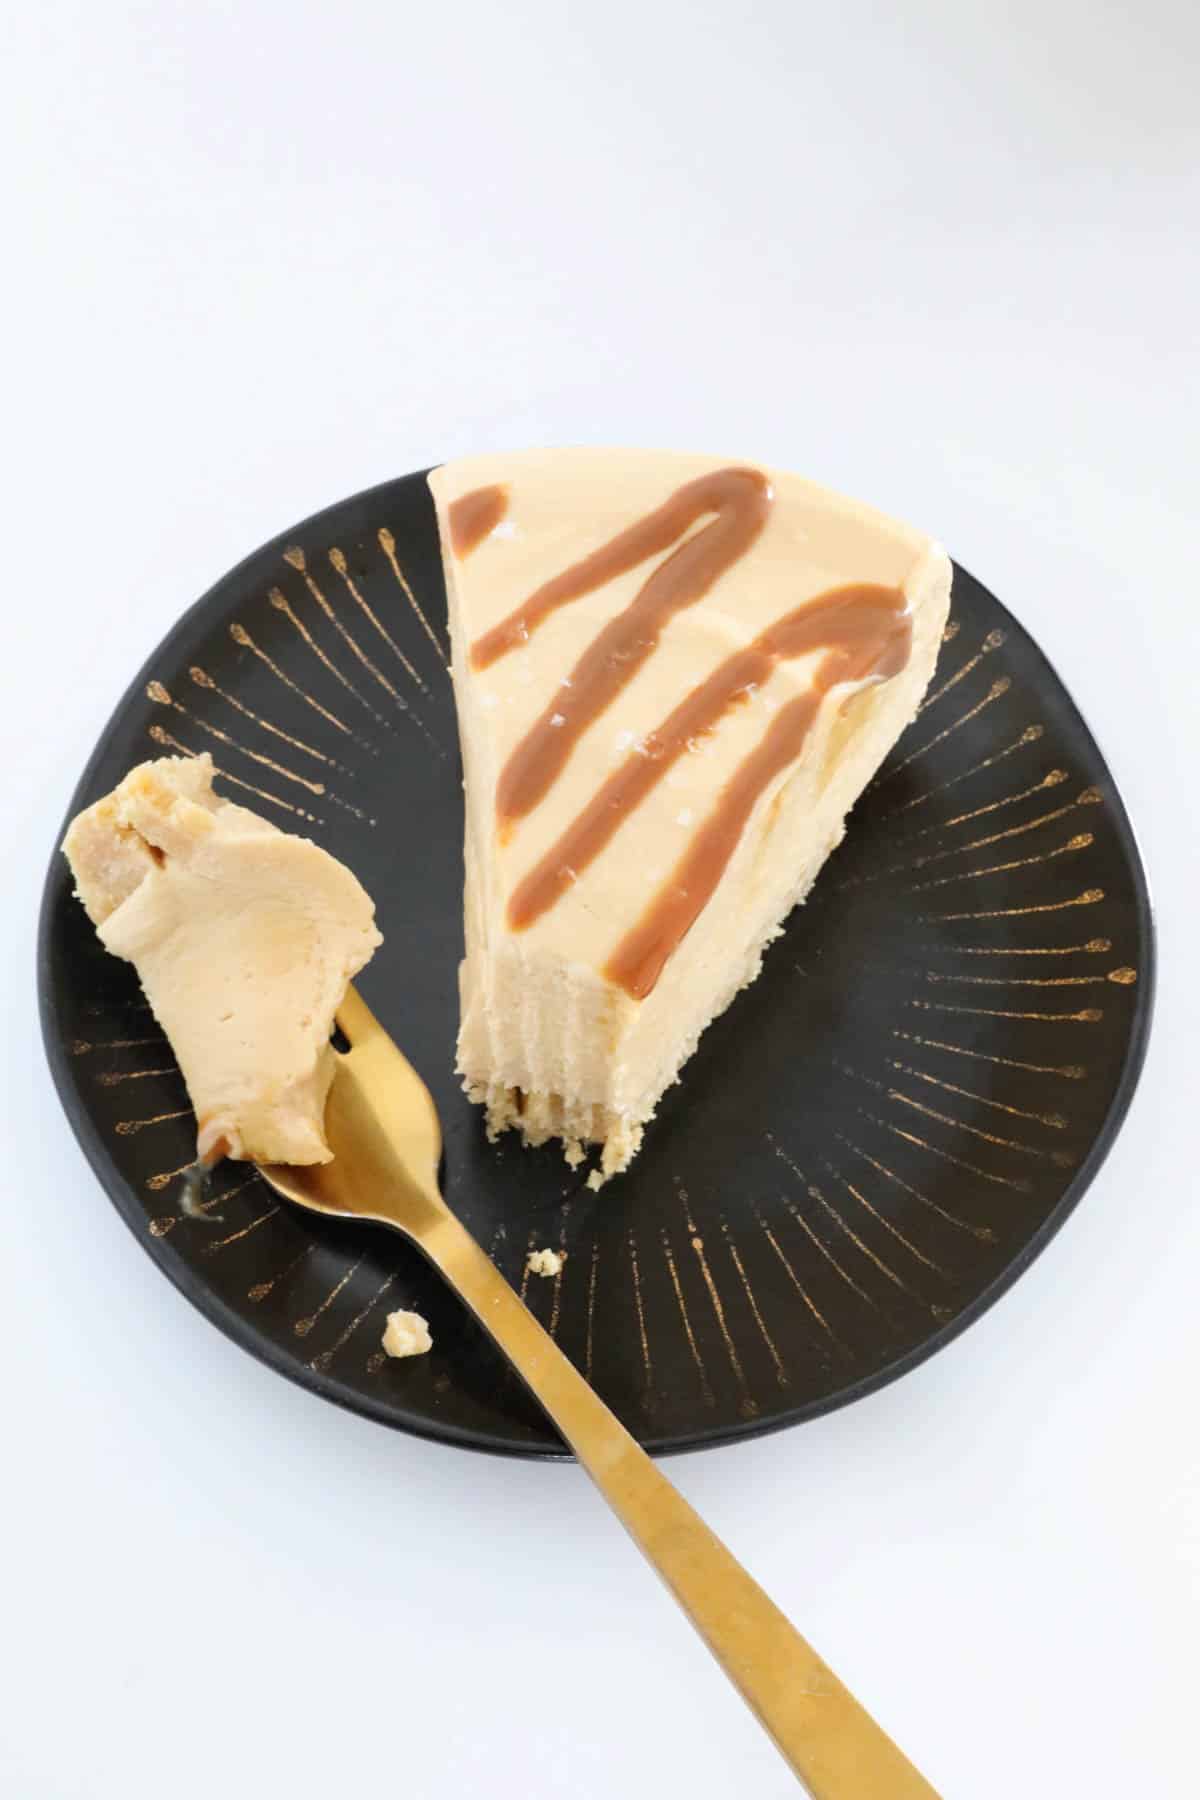 An overhead shot of a slice of dessert drizzled with caramel sauce, served on a black plate.